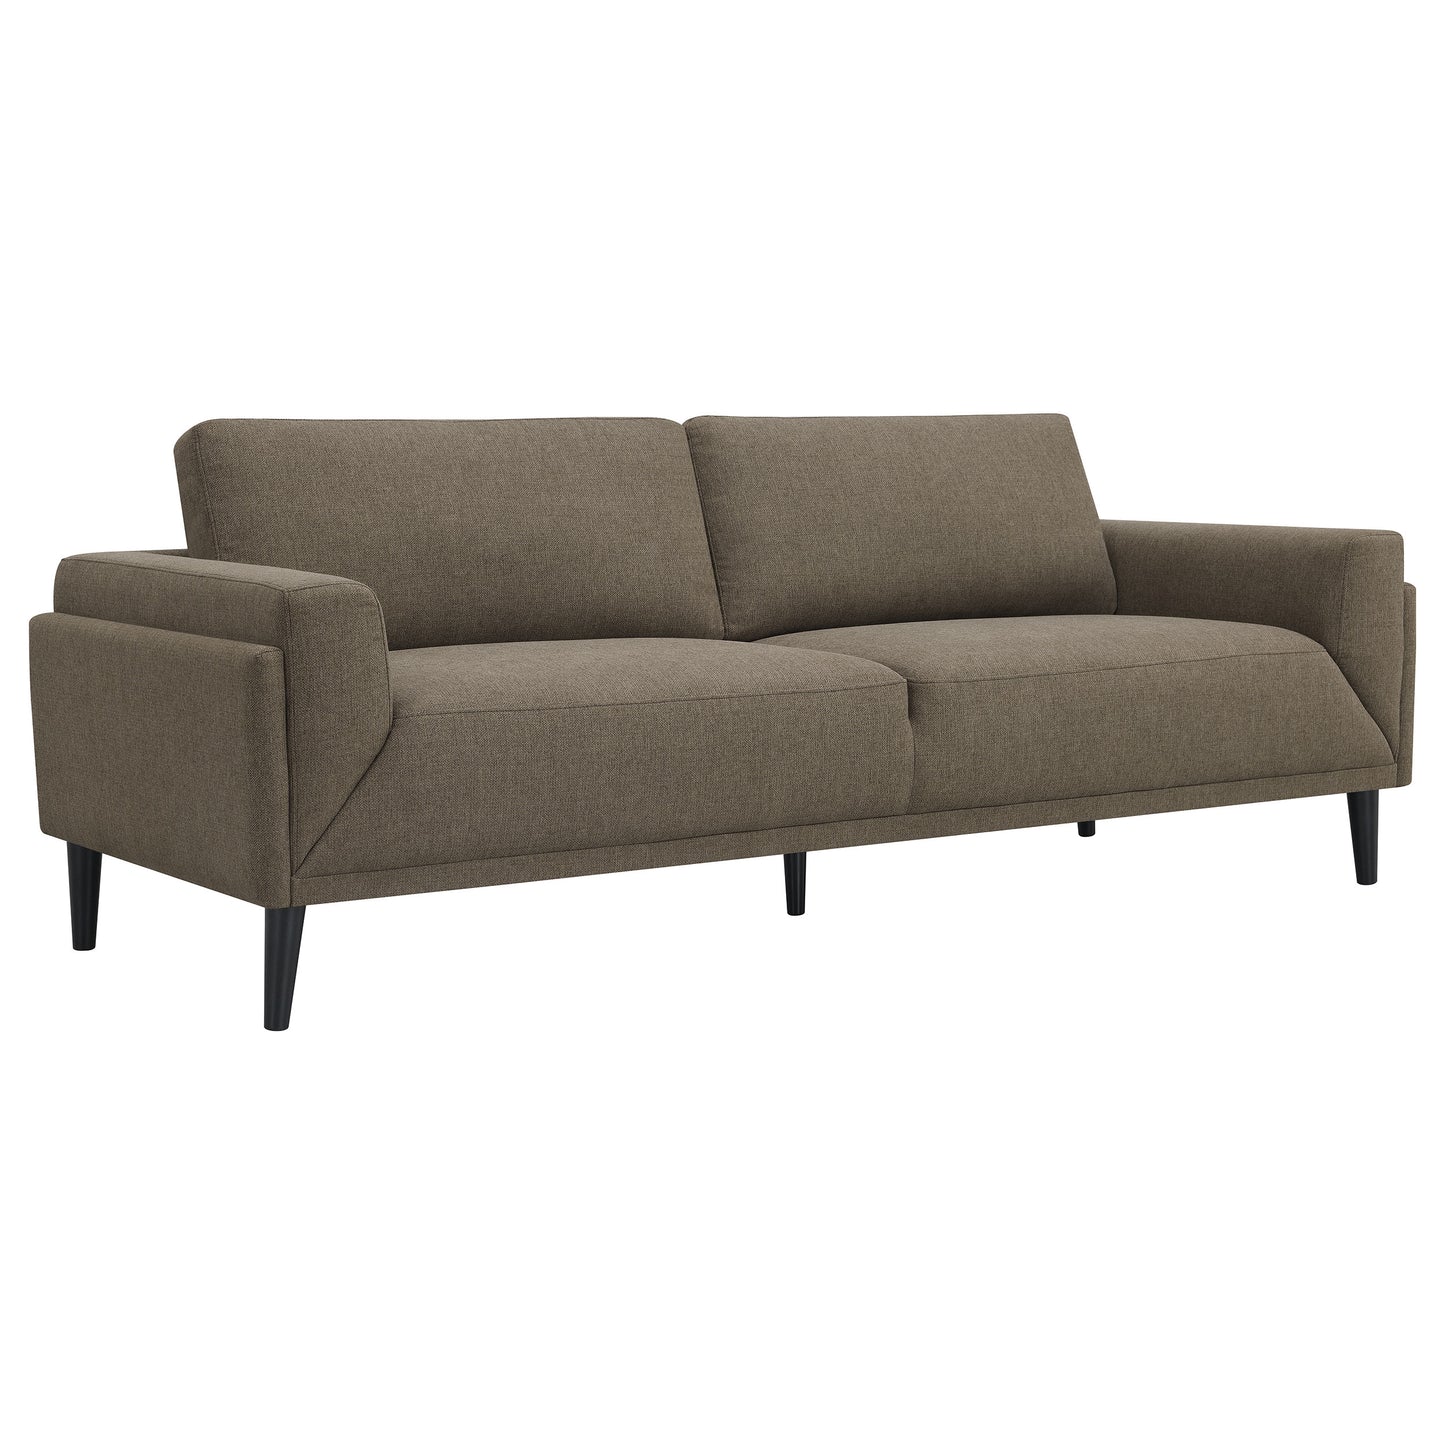 Rilynn 2-piece Upholstered Track Arms Sofa Set Brown